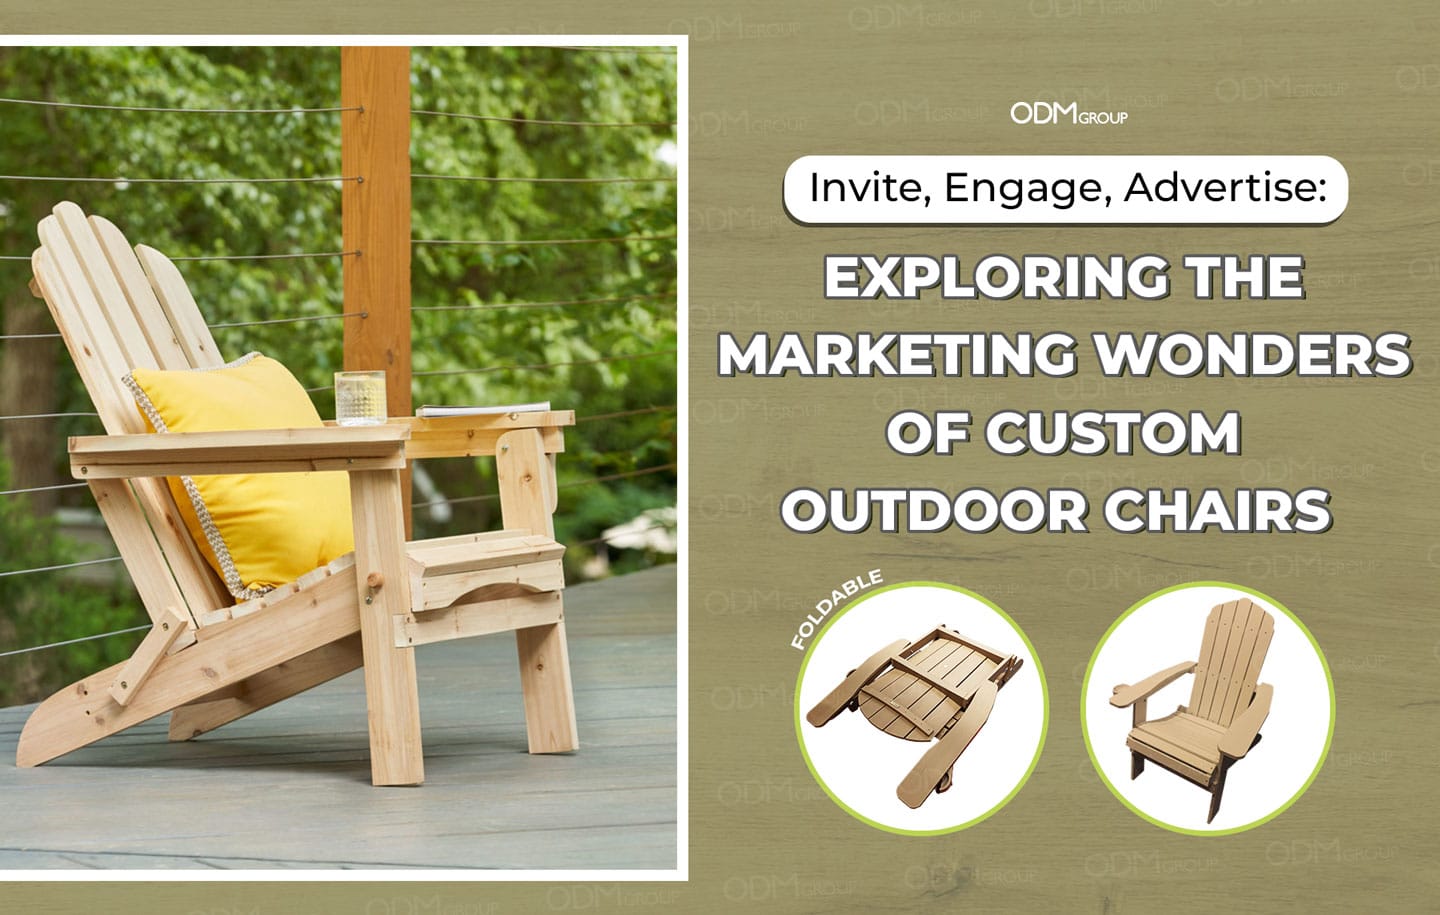 Giant Deck Chairs – A Brand Activation Must-Have - 1800 For Promo